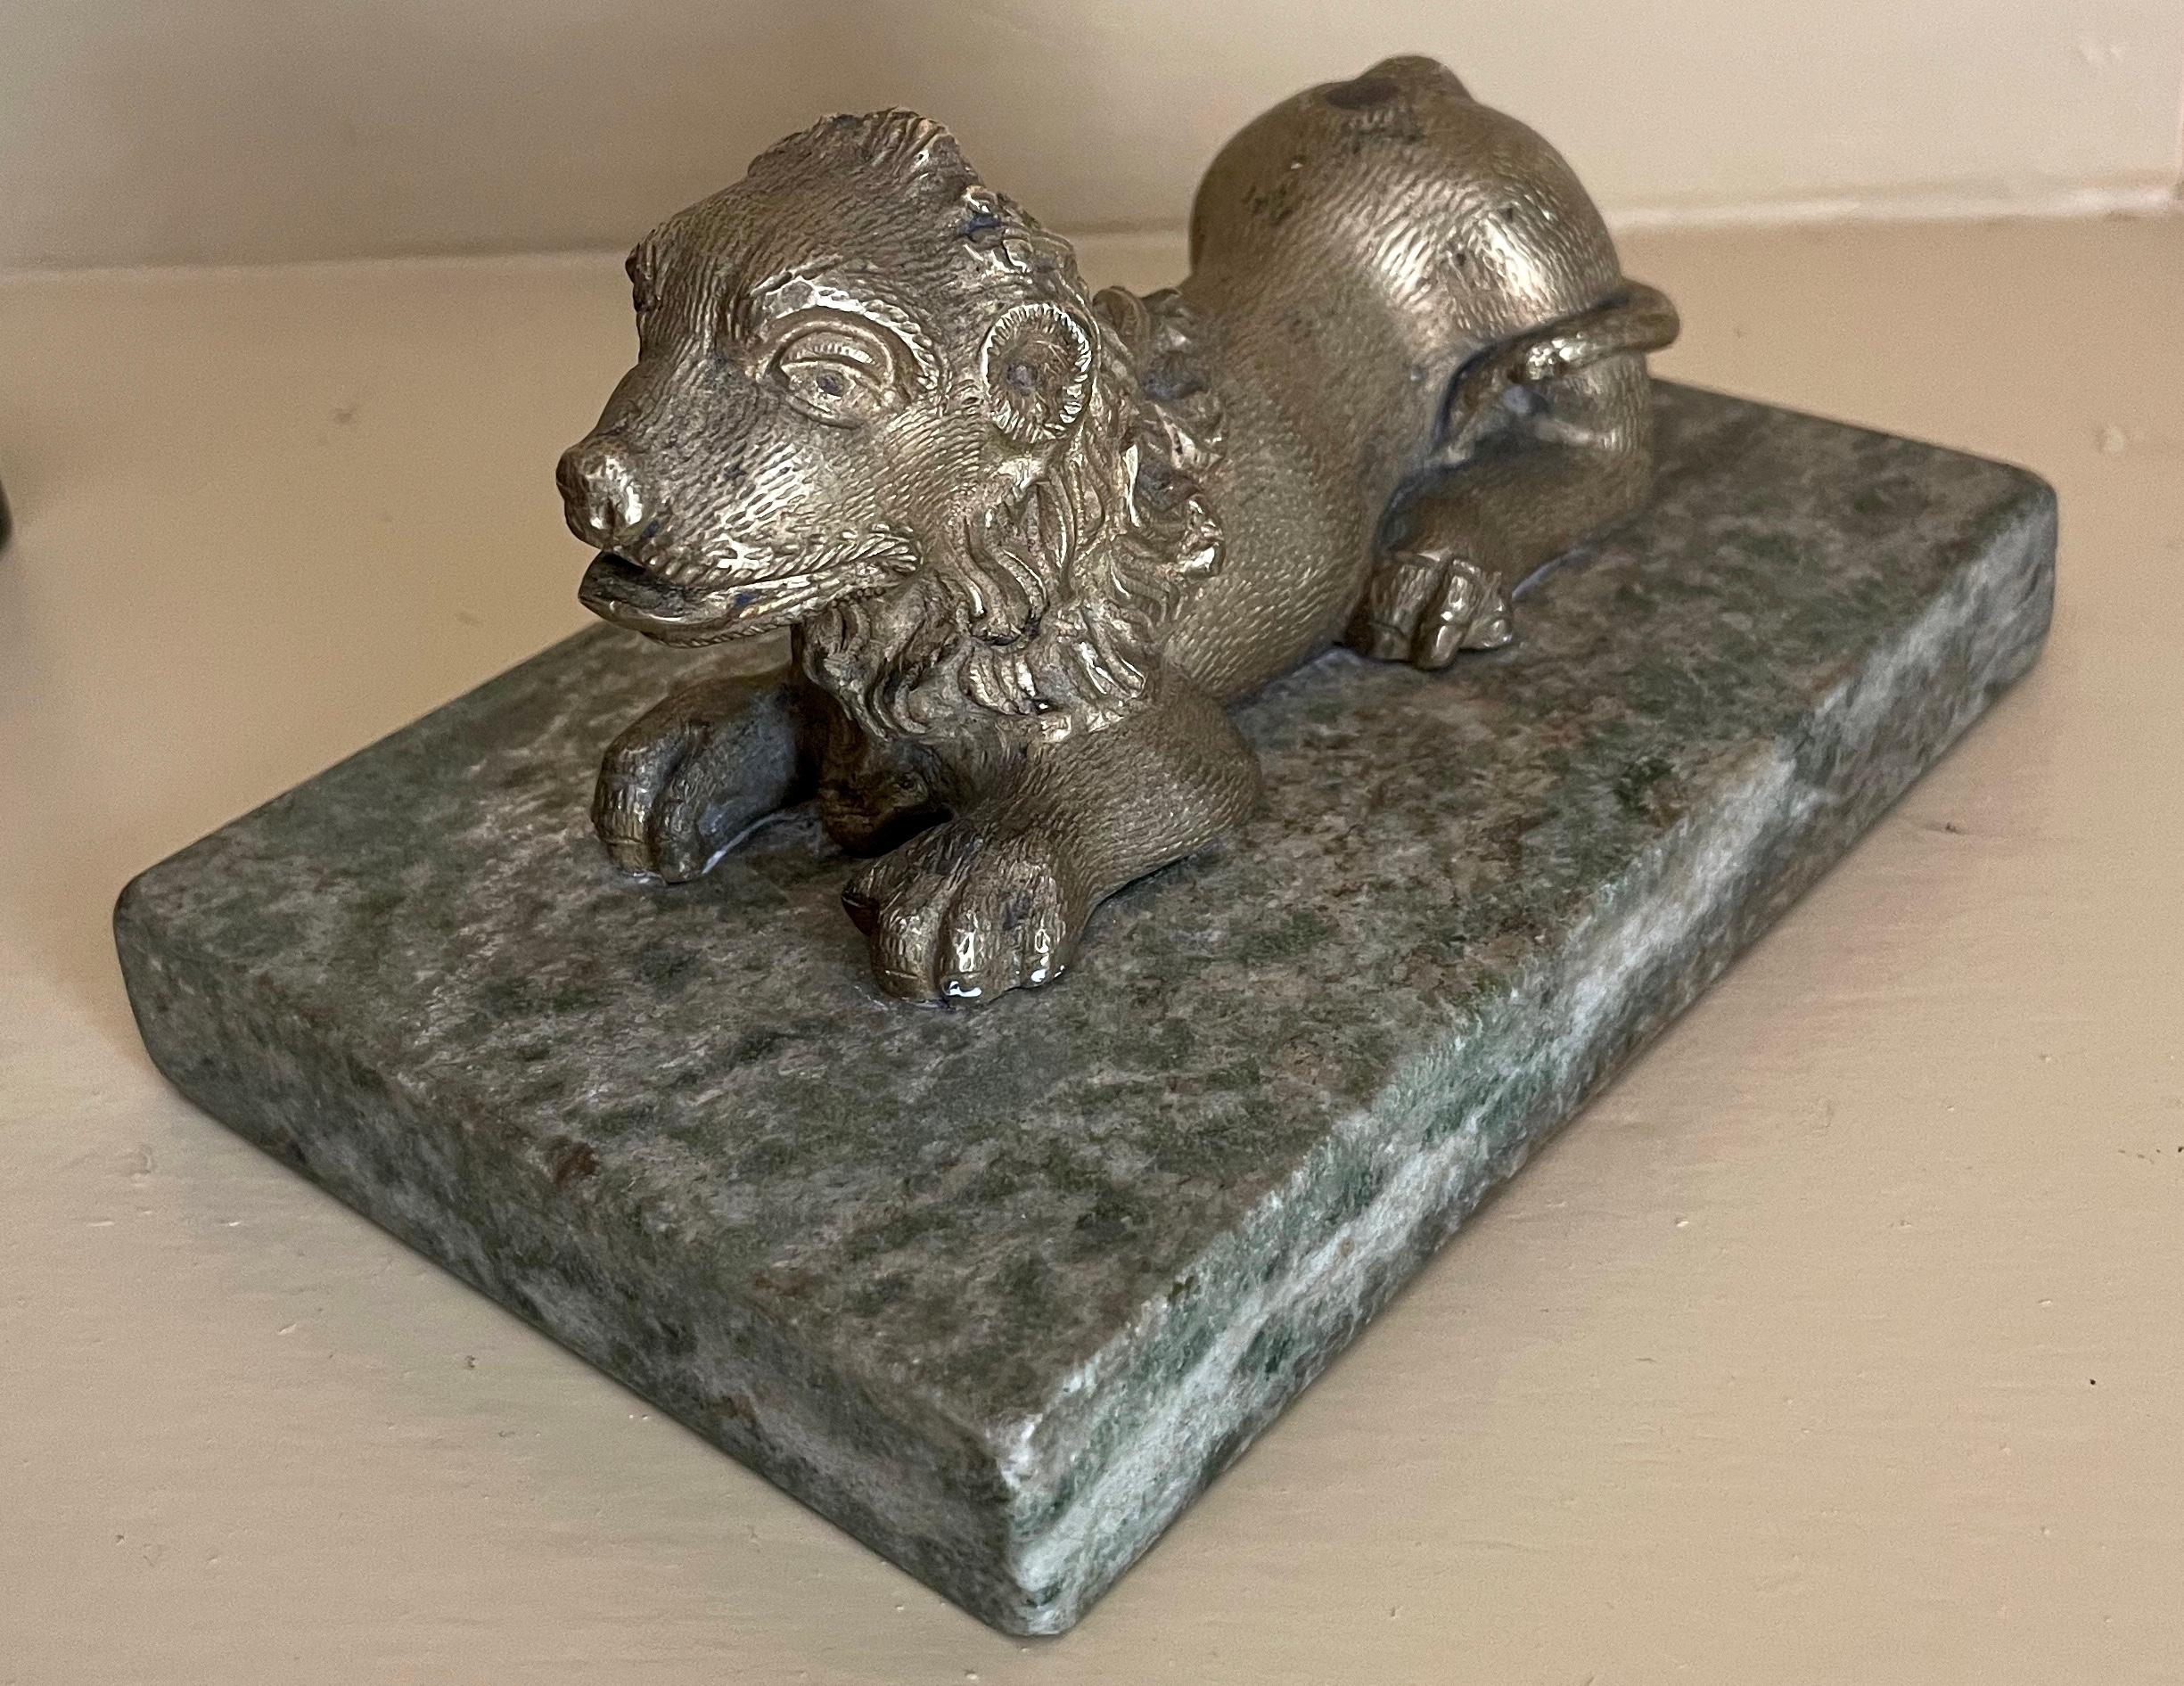 Gilt bronze lion on marble base. Antique chased gilt bronze recumbent lion on rare green speckled marble base.  Italy, late 17th century. 
Dimensions: Overal 5.88